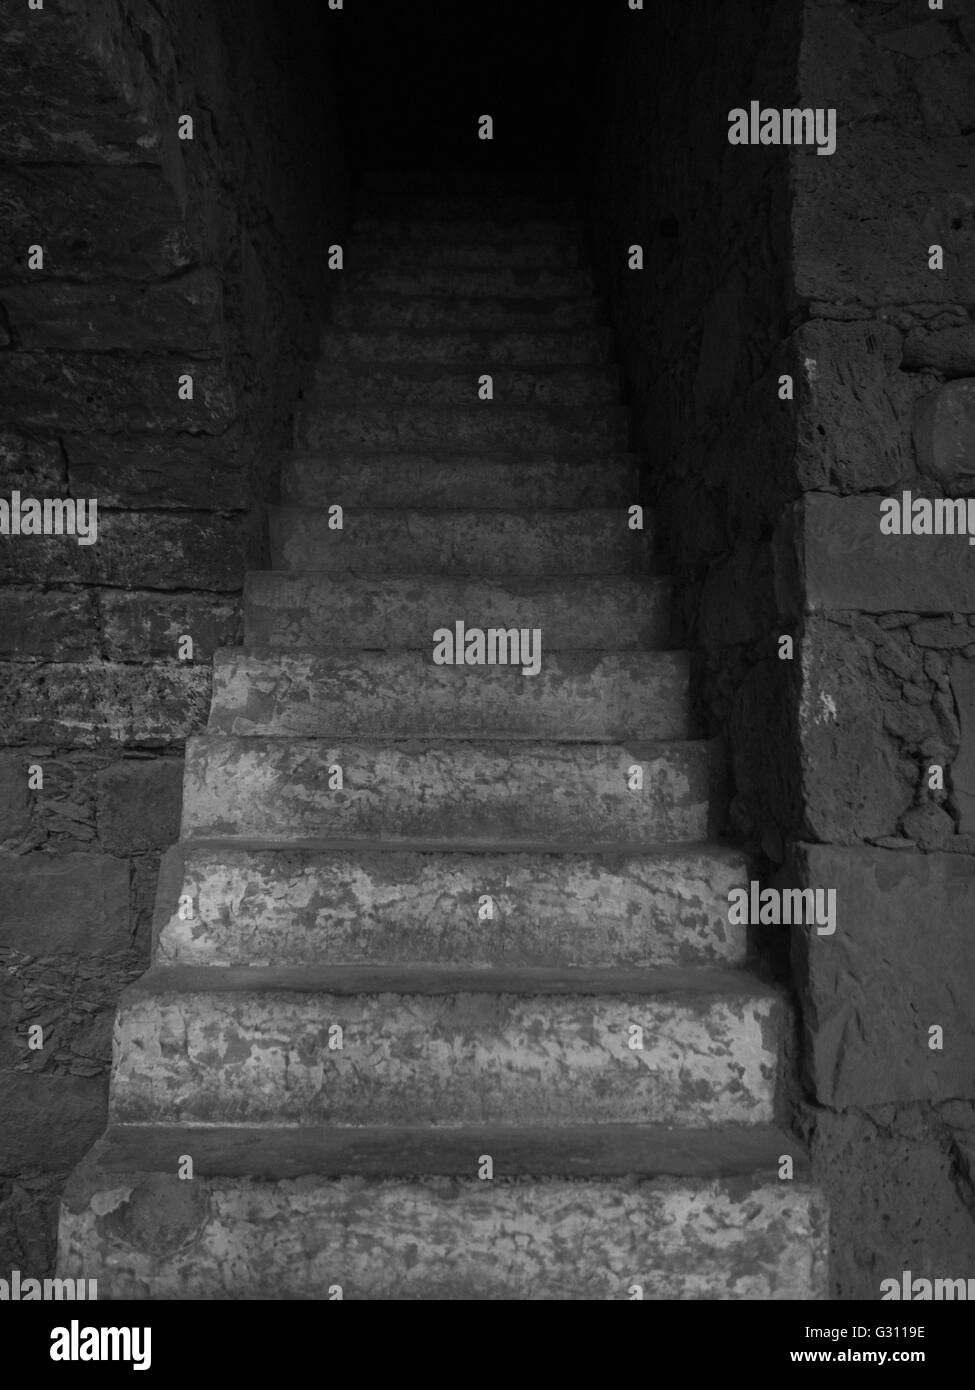 Black and white image of stairs Stock Photo